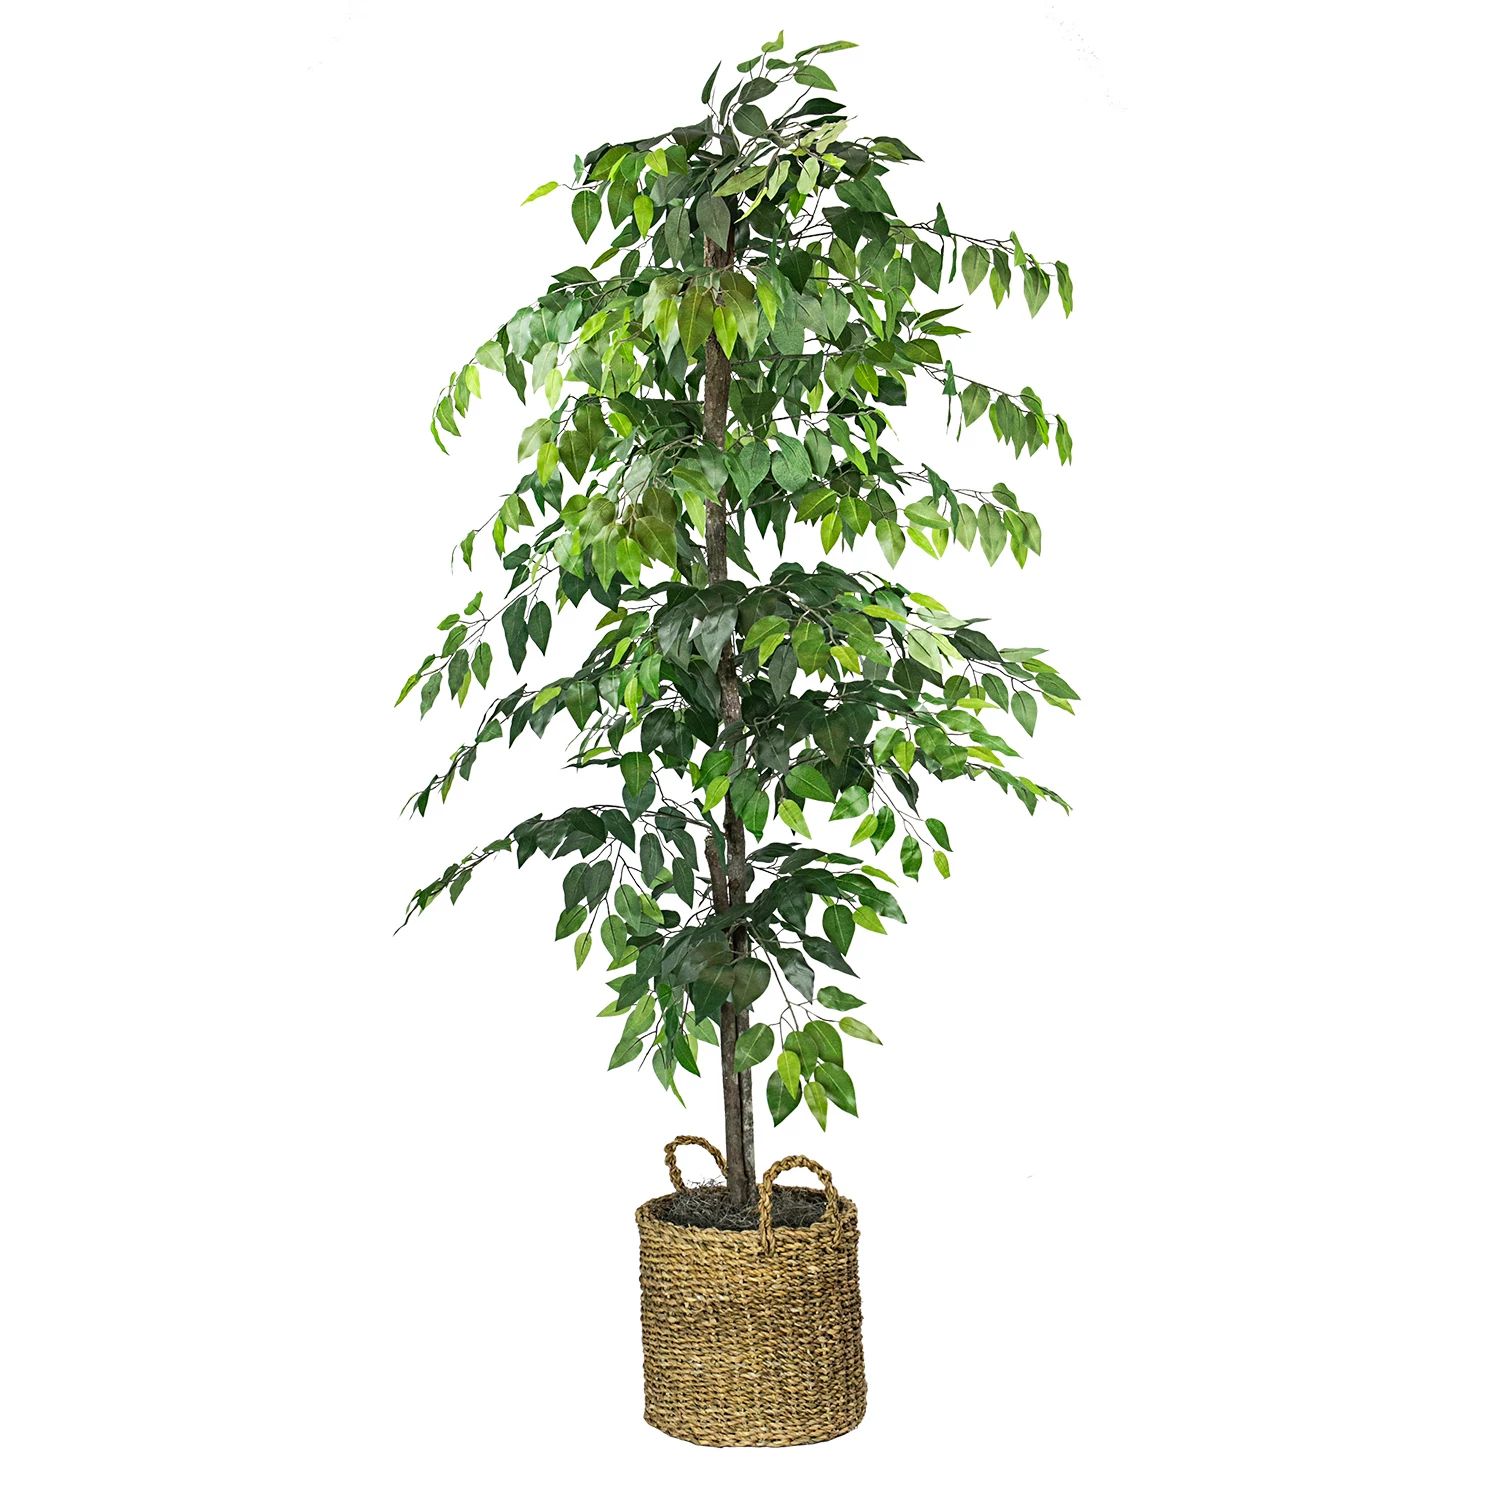 Faux 6' Ficus Tree in Roped-Style Handwoven Basket | Sam's Club